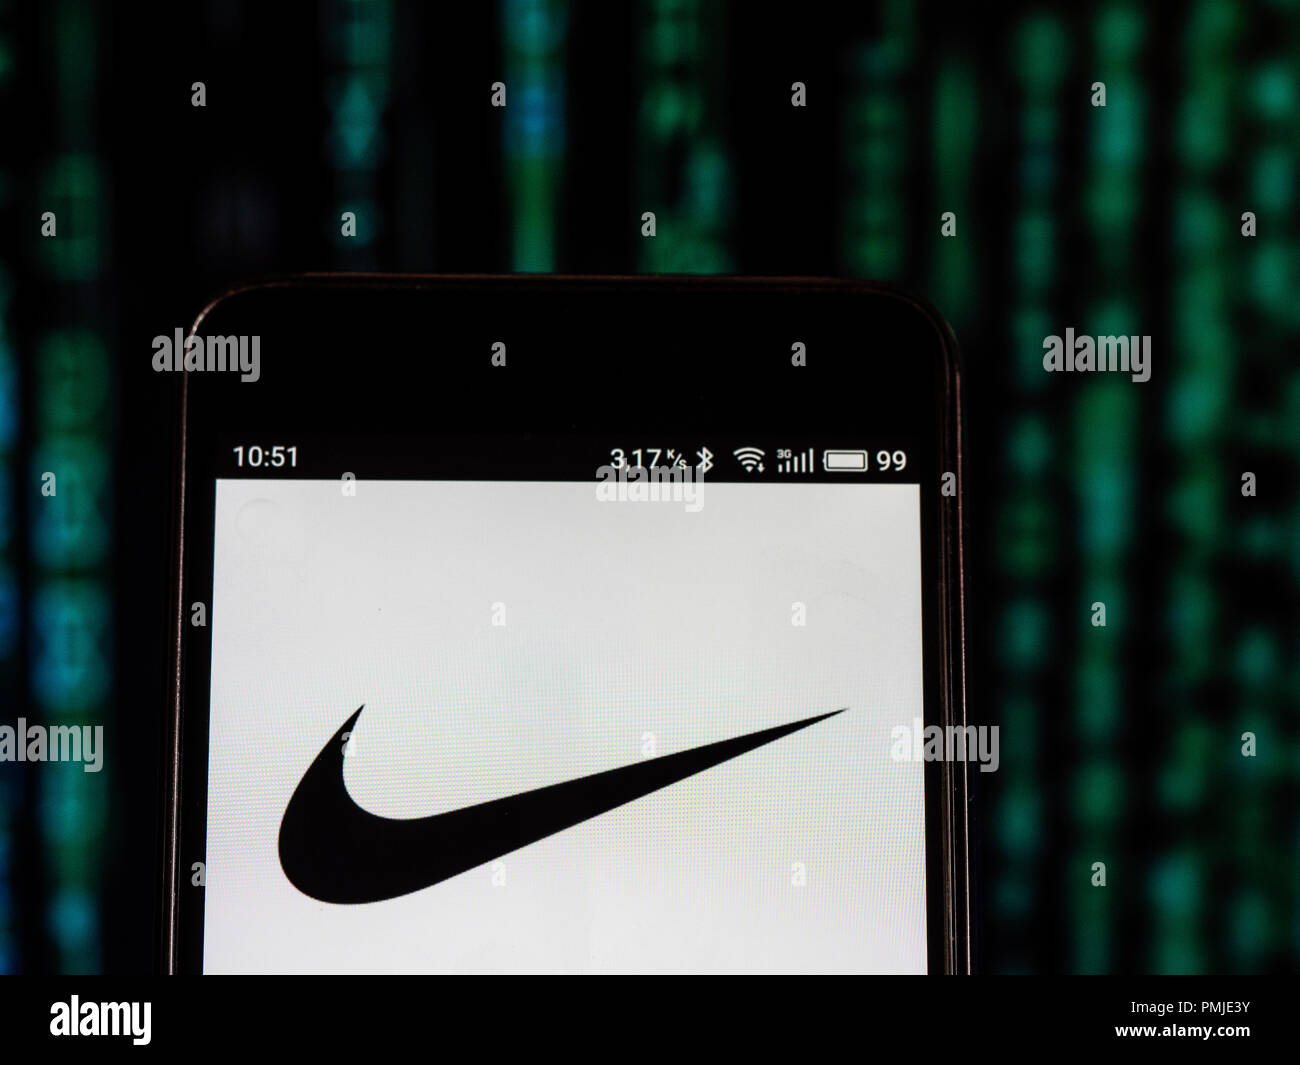 Nike Footwear manufacturing company logo seen displayed on a smart phone.  Nike, Inc. is an American multinational corporation that is engaged in the  design, development, manufacturing, and worldwide marketing and sales of